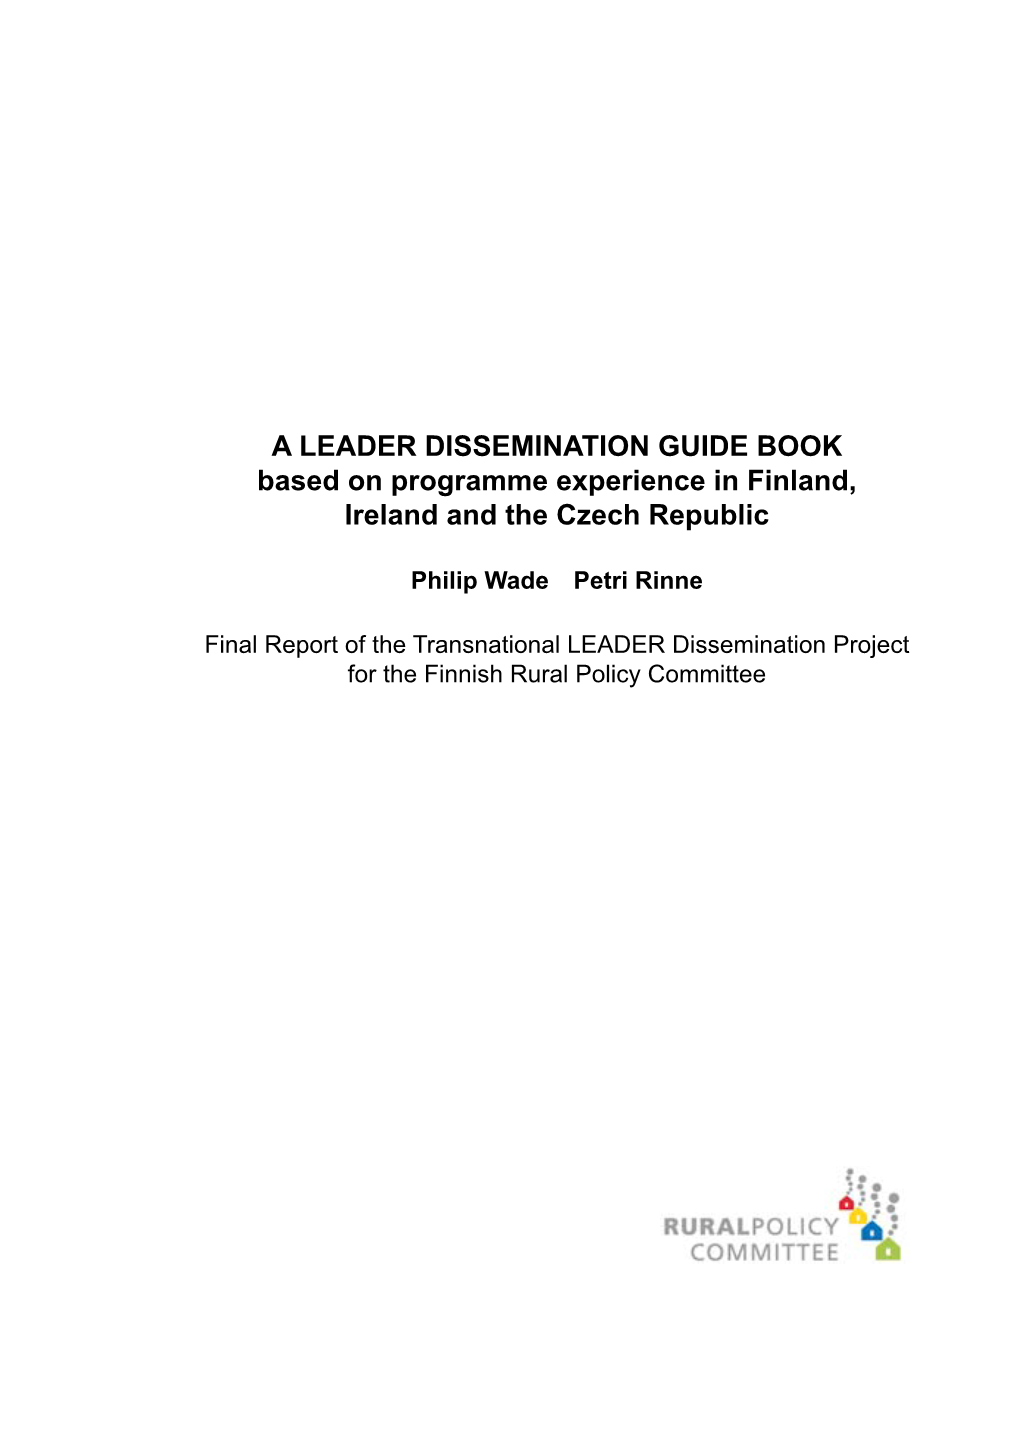 A LEADER Dissemination Guide Book Based on Programme Experience in Finland, Ireland and the Czech Republic